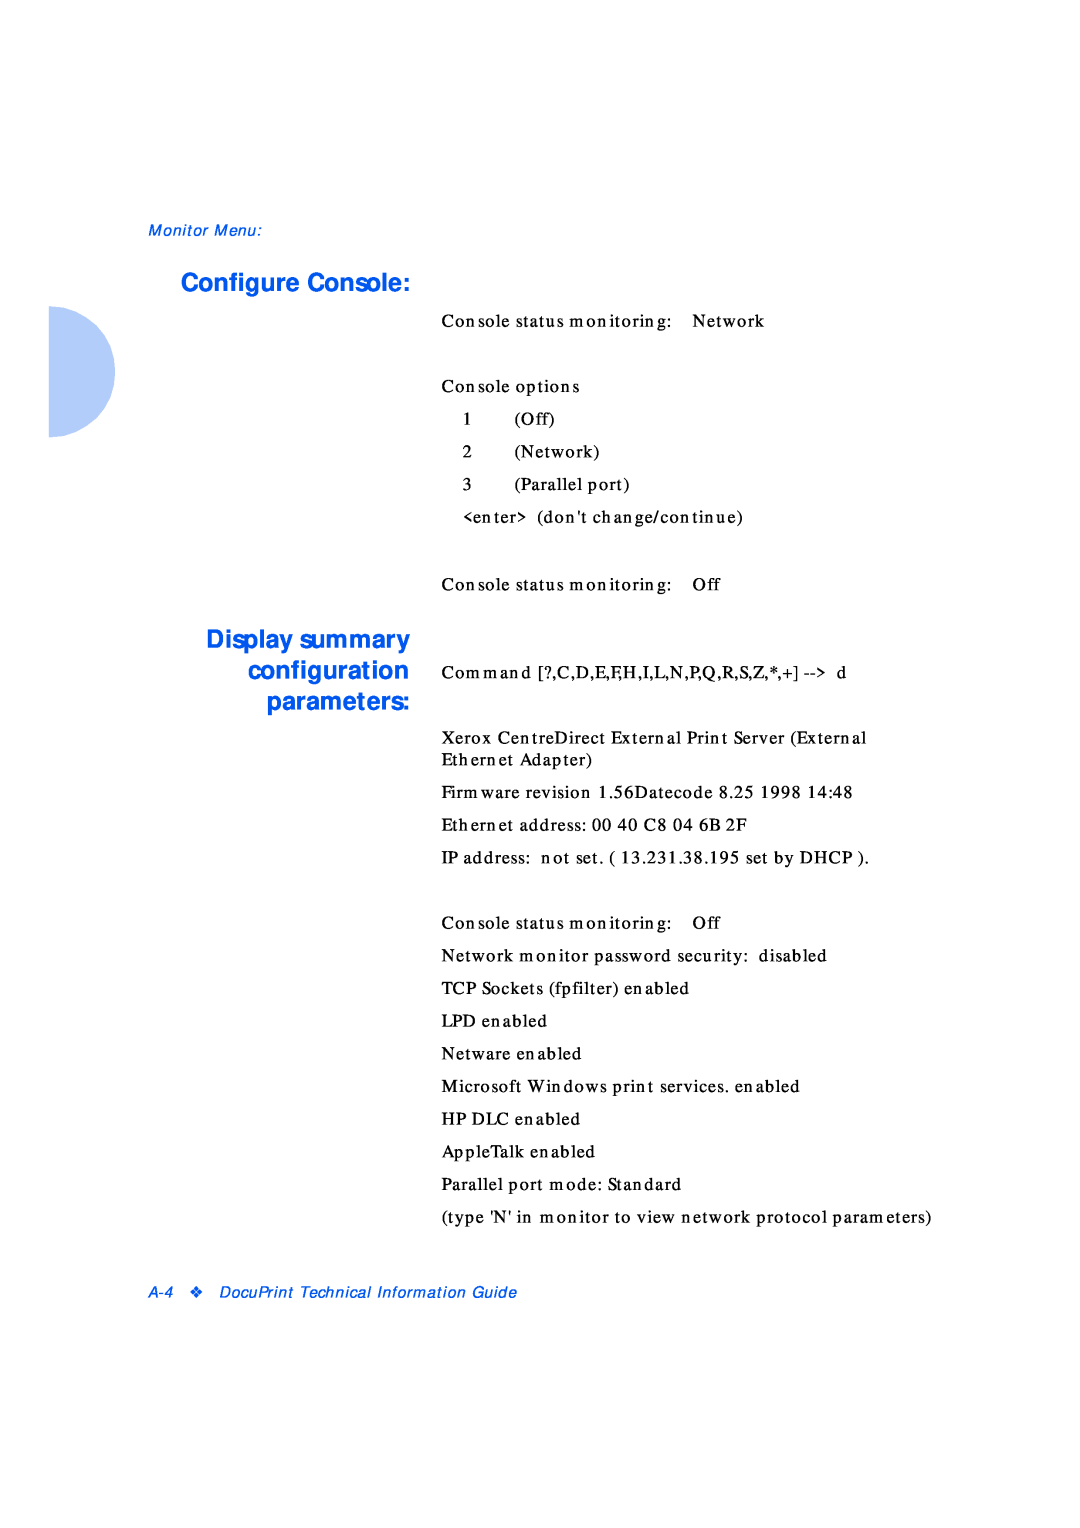 Xerox Network Laser Printers manual Configure Console, Display summary configuration parameters 